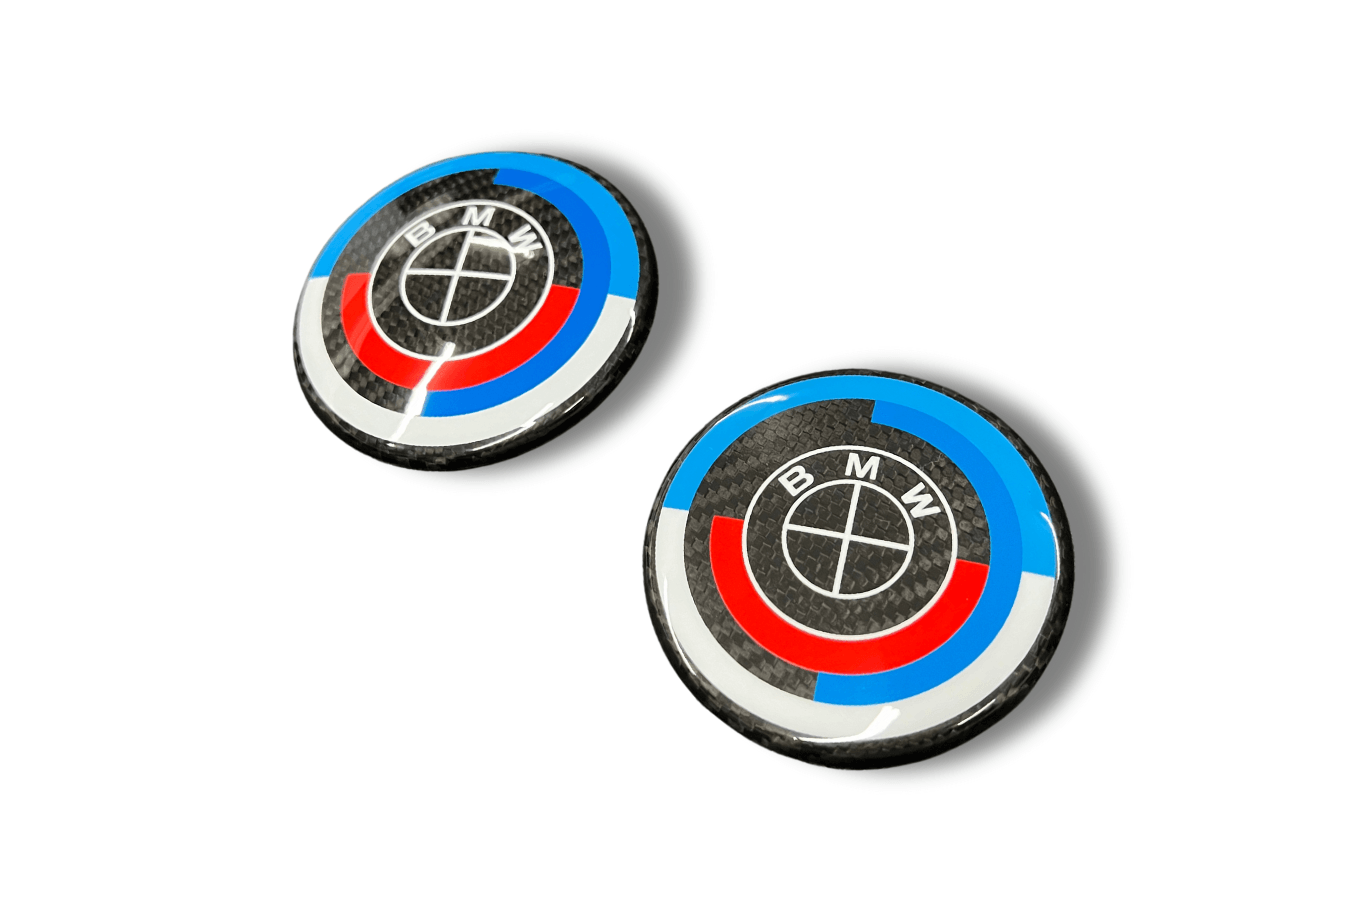 BMW Roundel Emblems - Full Carbon 50th Anniversary Style - K2 Industries